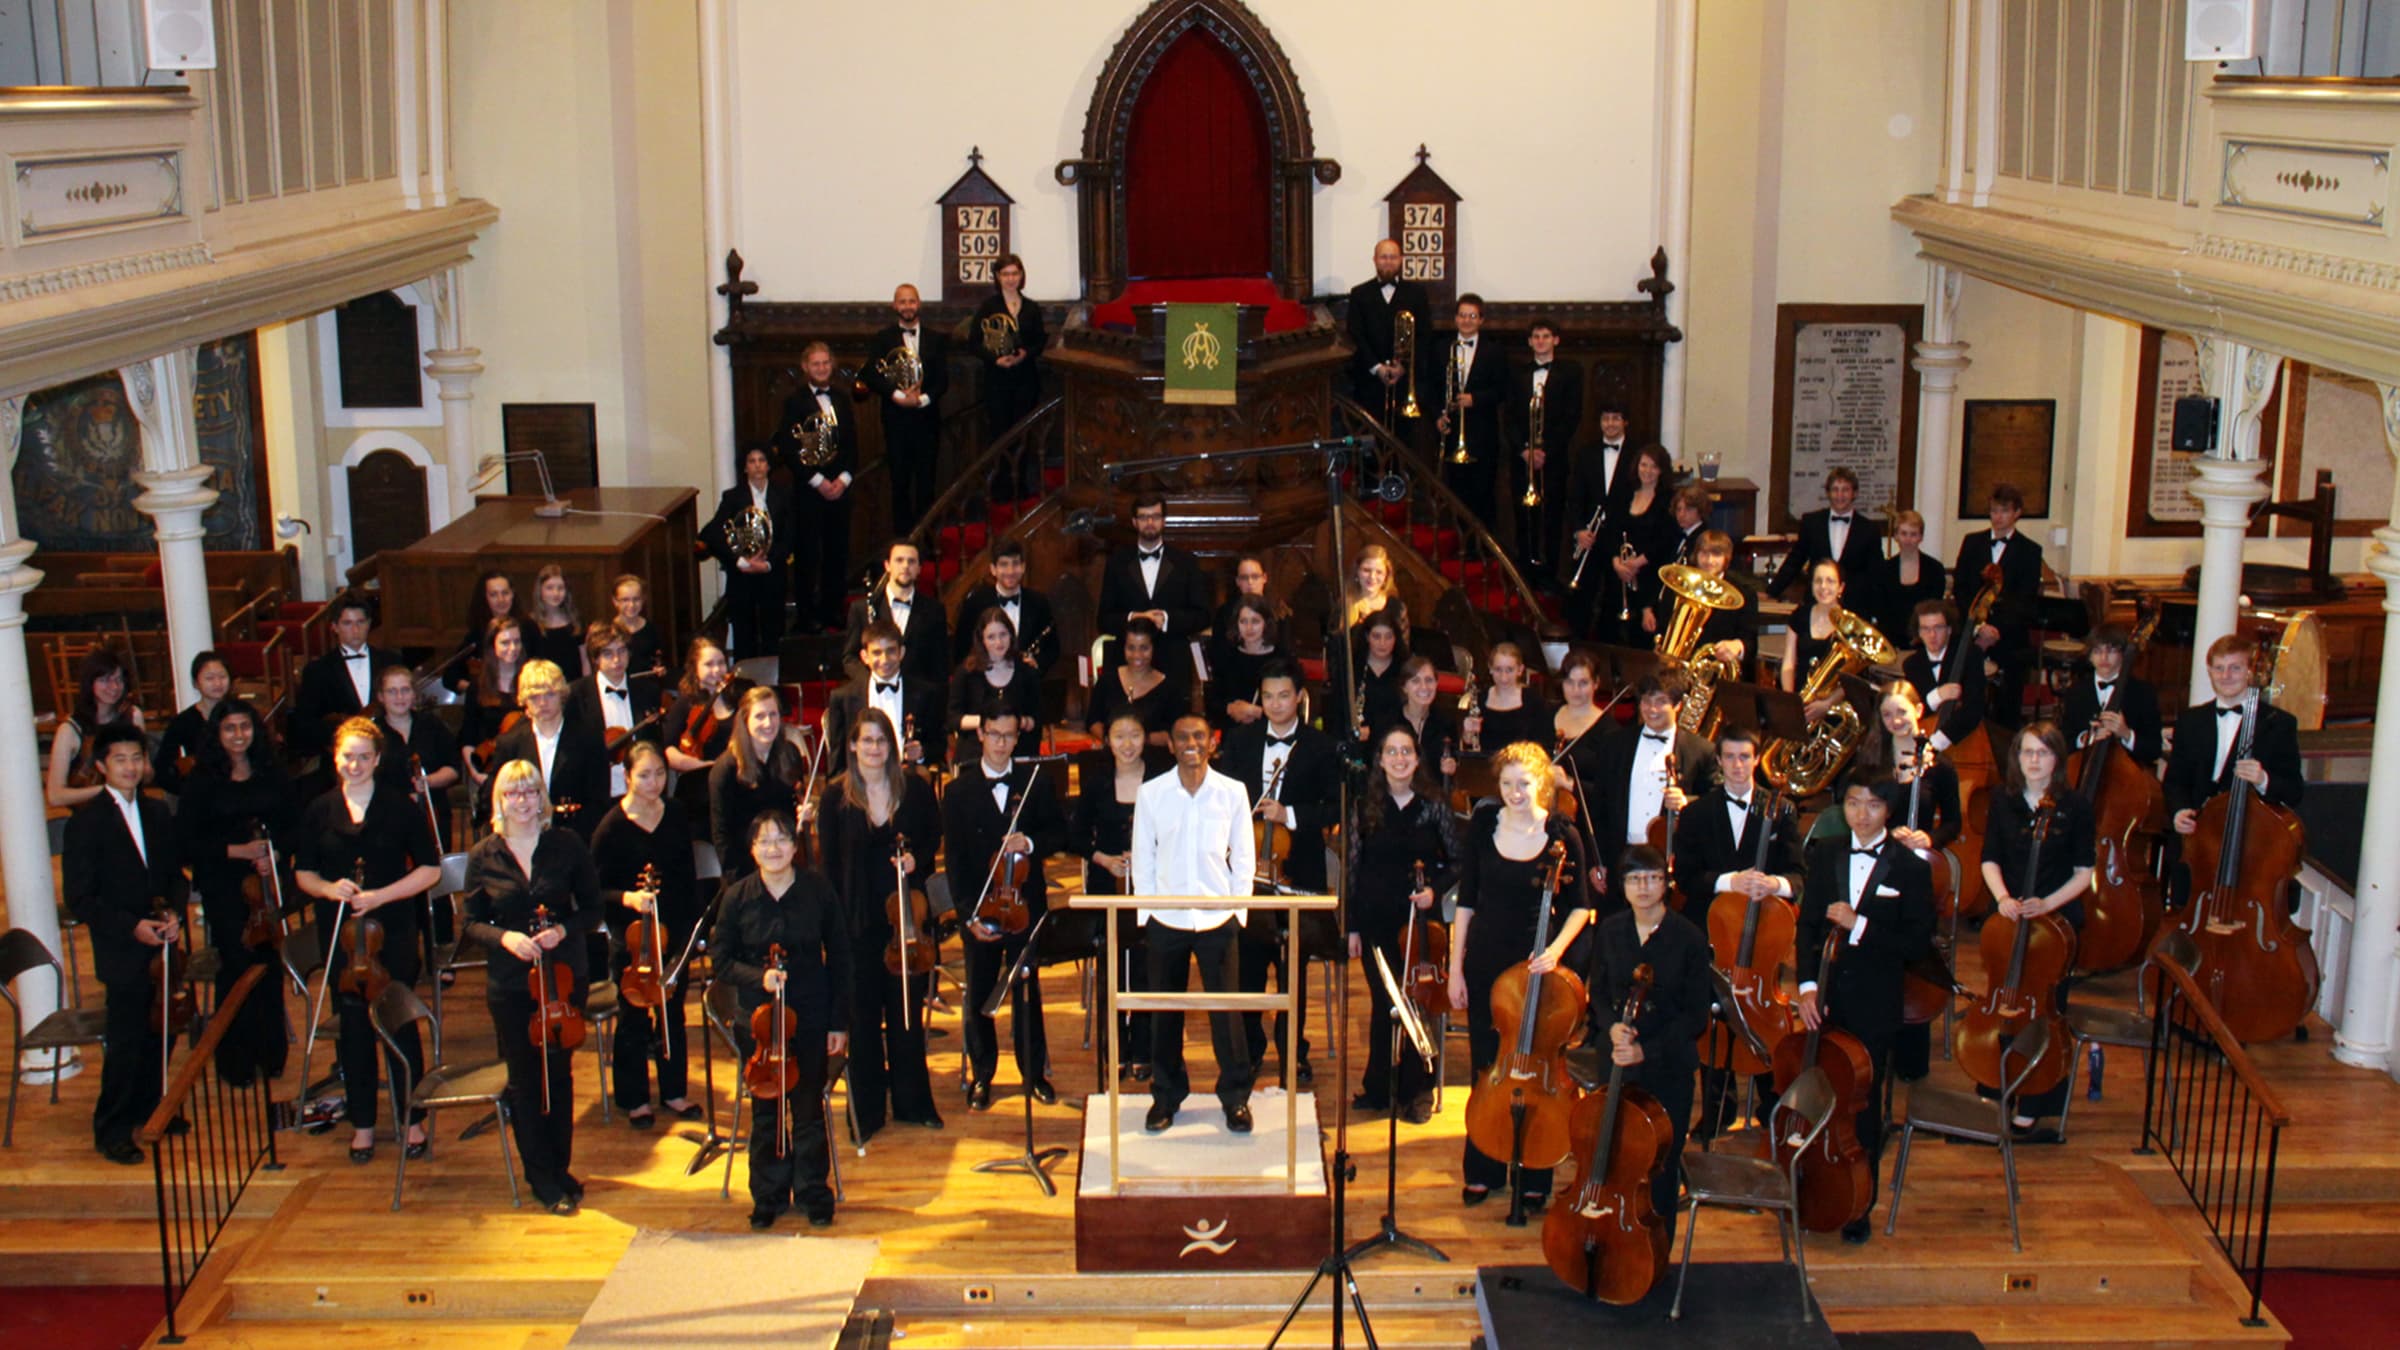 About the Nova Scotia Youth Orchestra